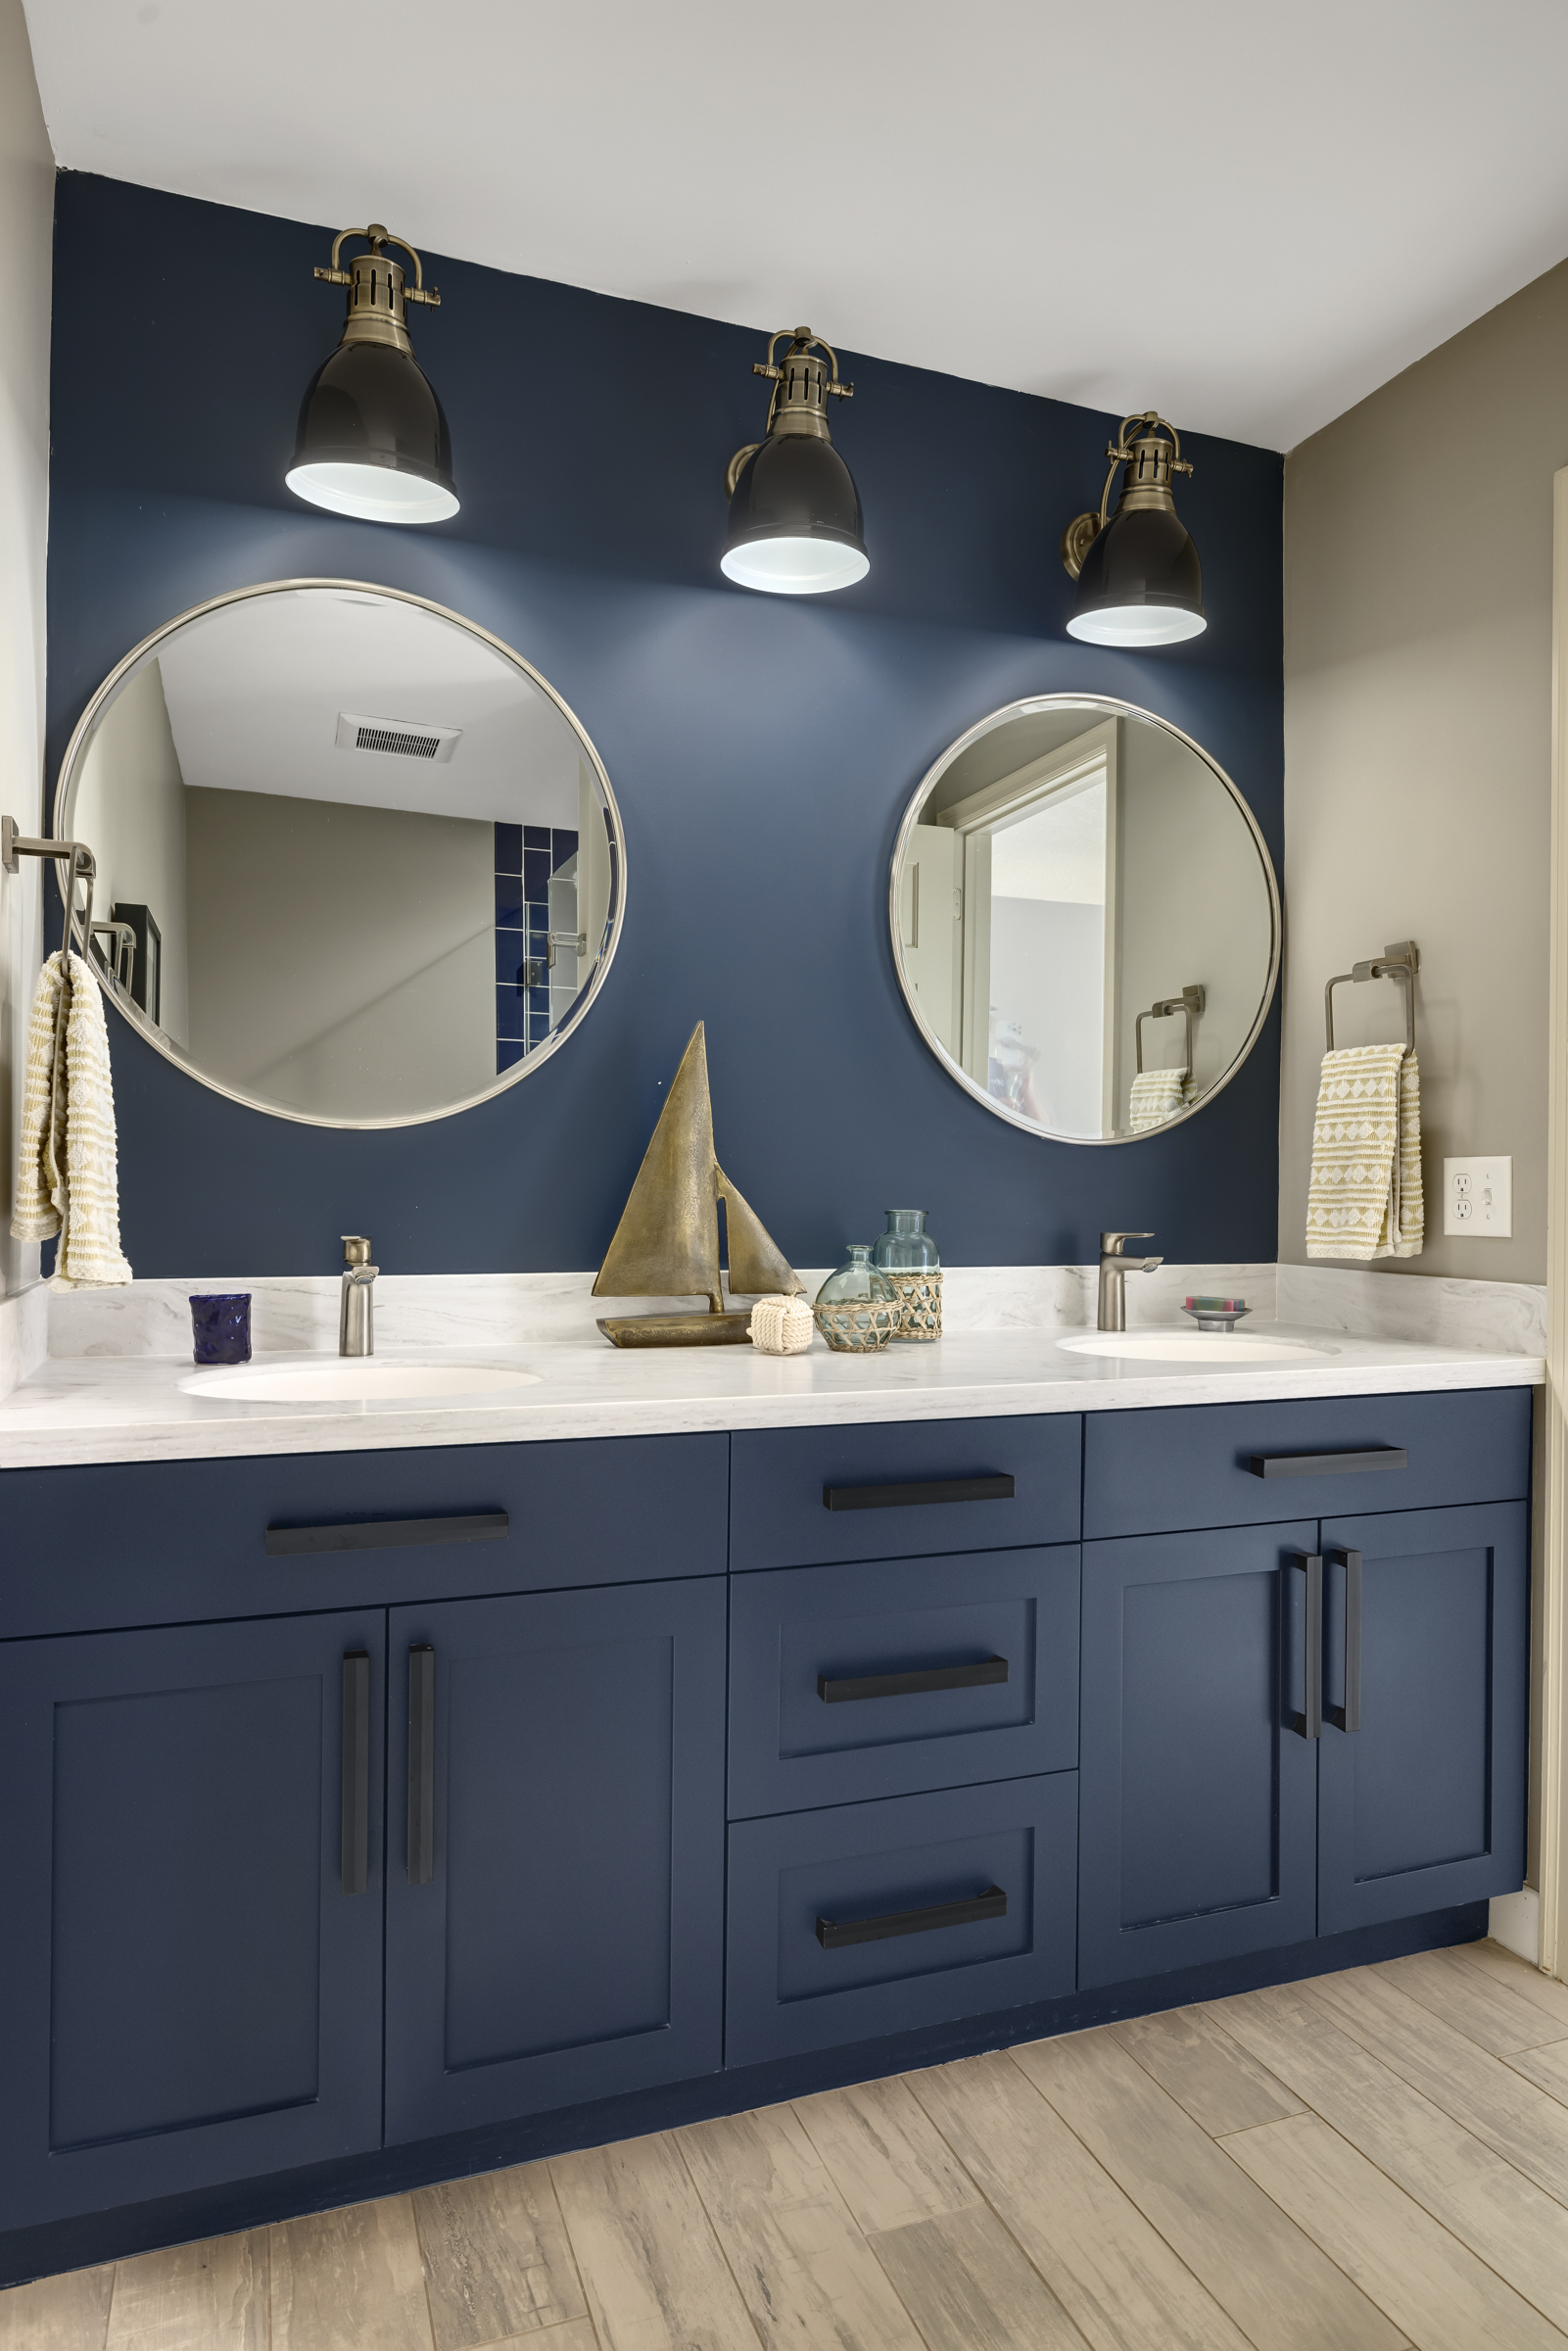 Bathroom remodel with blue cabinet and round mirrors above sinks